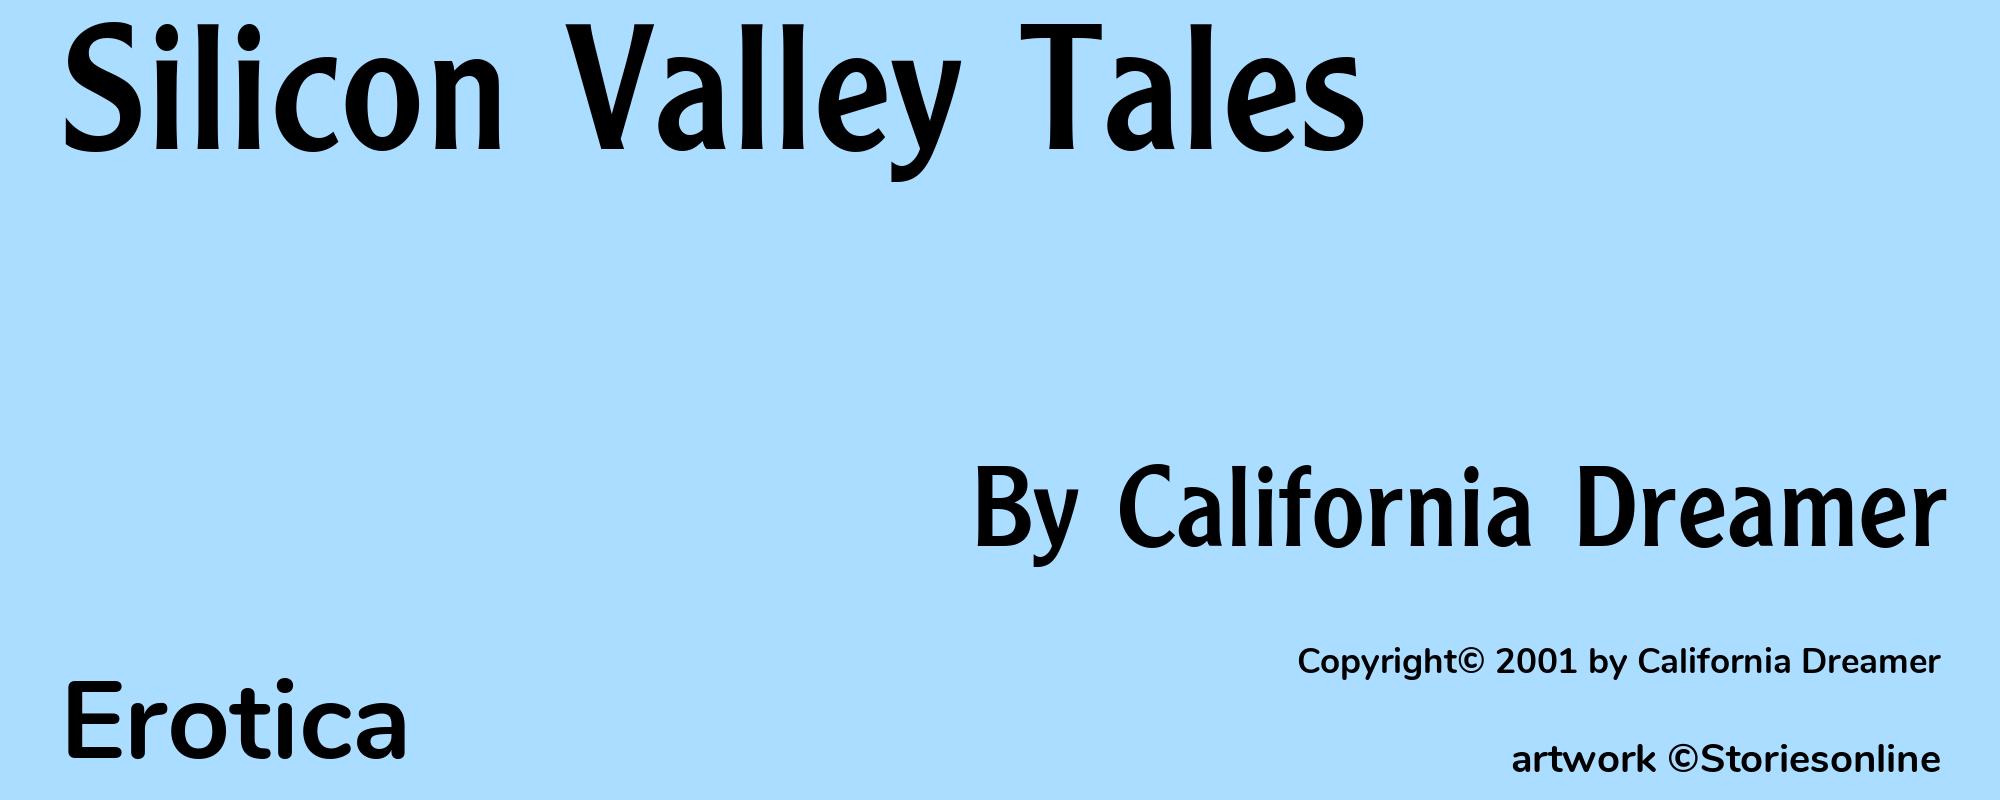 Silicon Valley Tales - Cover